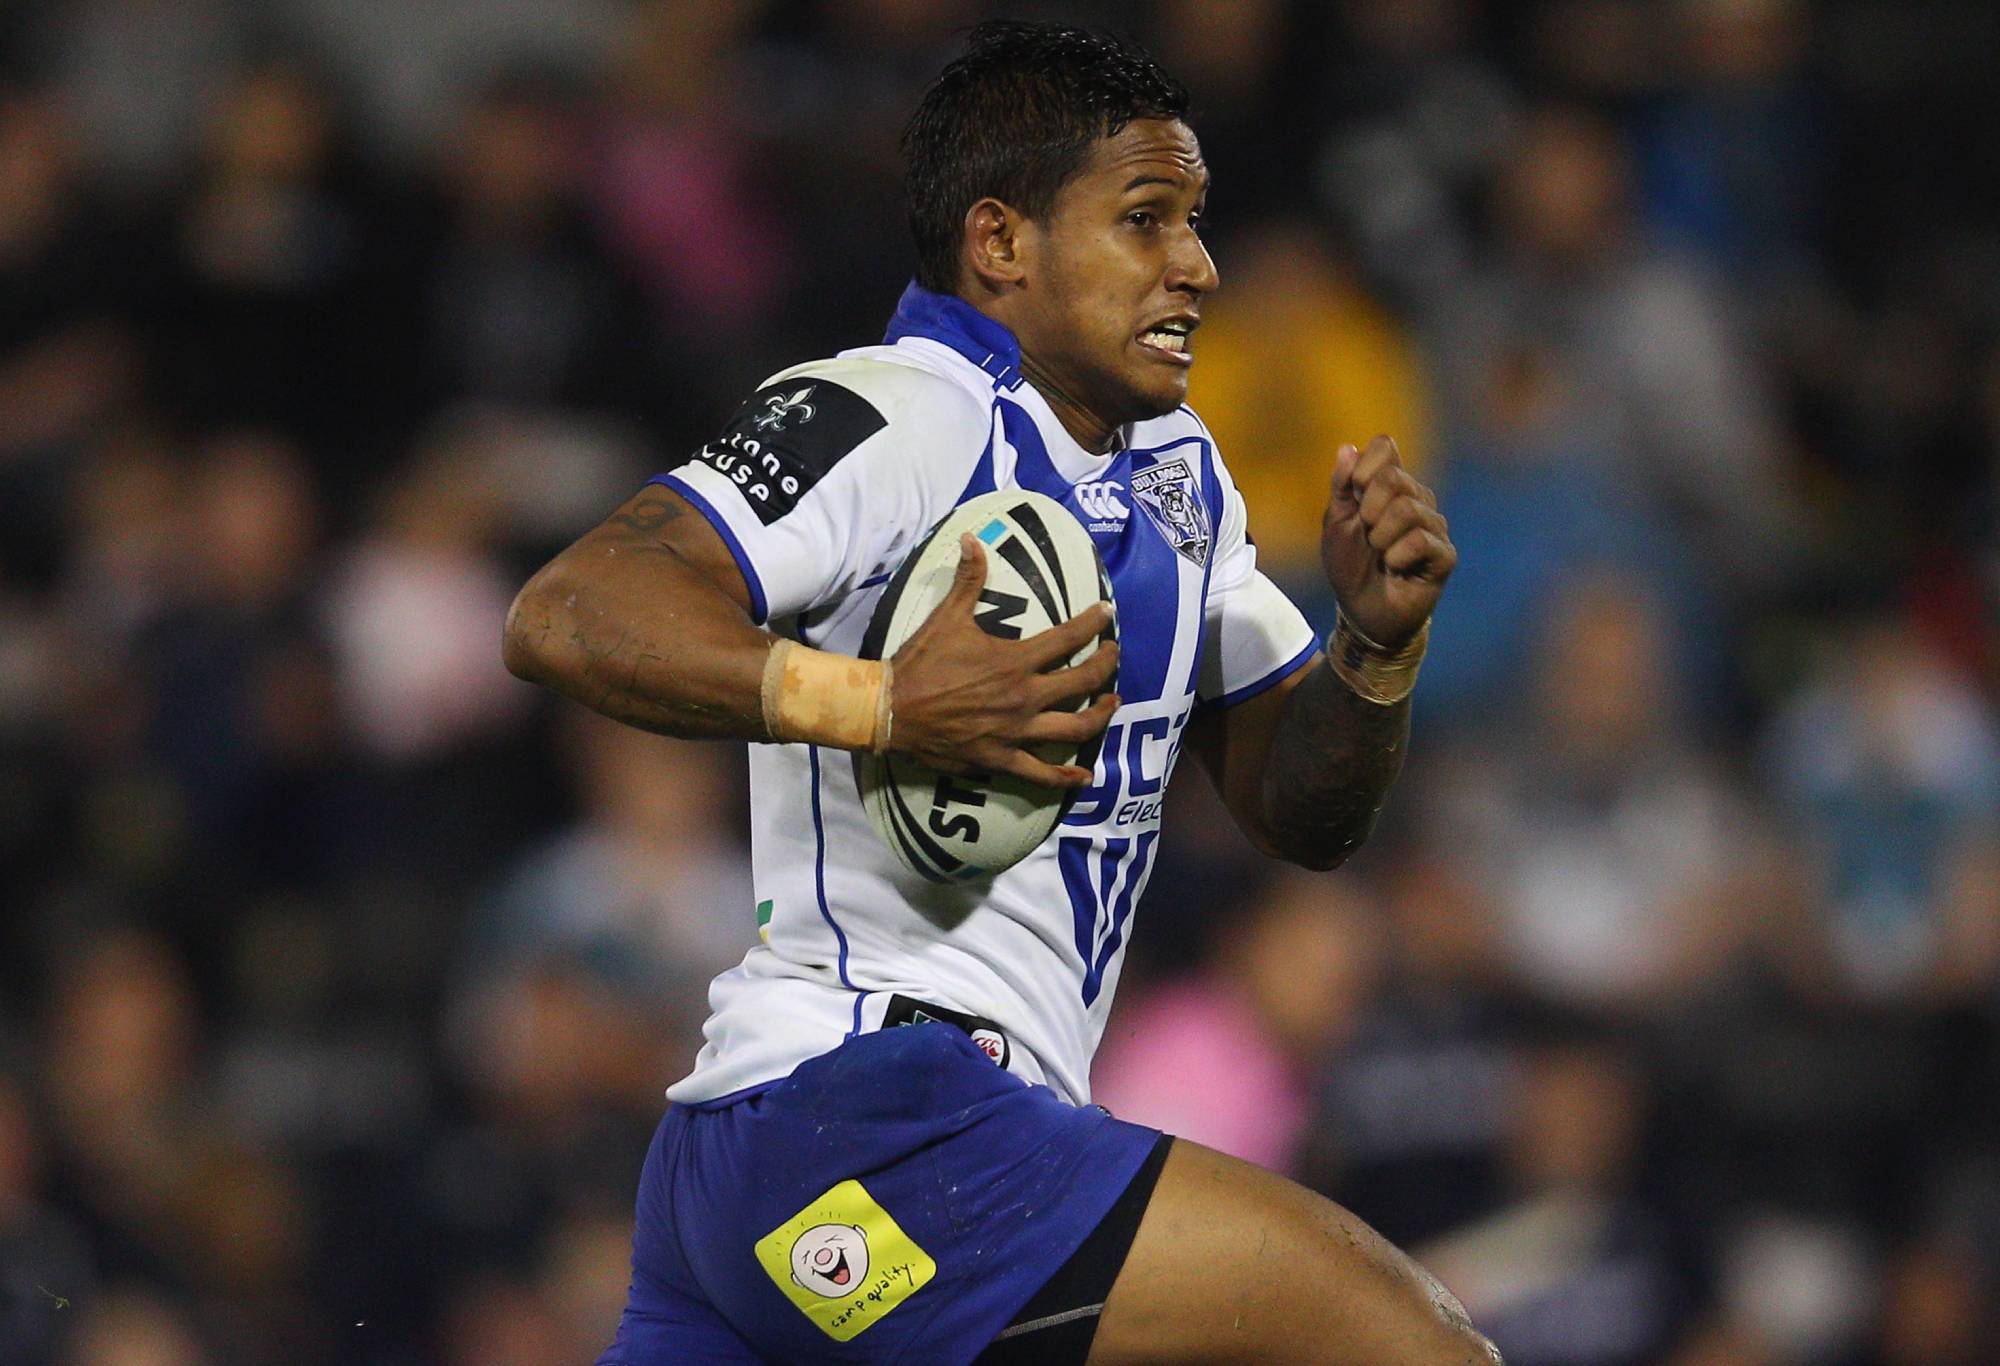 PENRITH, AUSTRALIA - MARCH 03:  Ben Barba of the Bulldogs makes a break on his way to scoring a try during the round one NRL match between the Penrith Panthers and the Canterbury Bulldogs at Centrebet Stadium on March 3, 2012 in Penrith, Australia.  (Photo by Mark Kolbe/Getty Images)